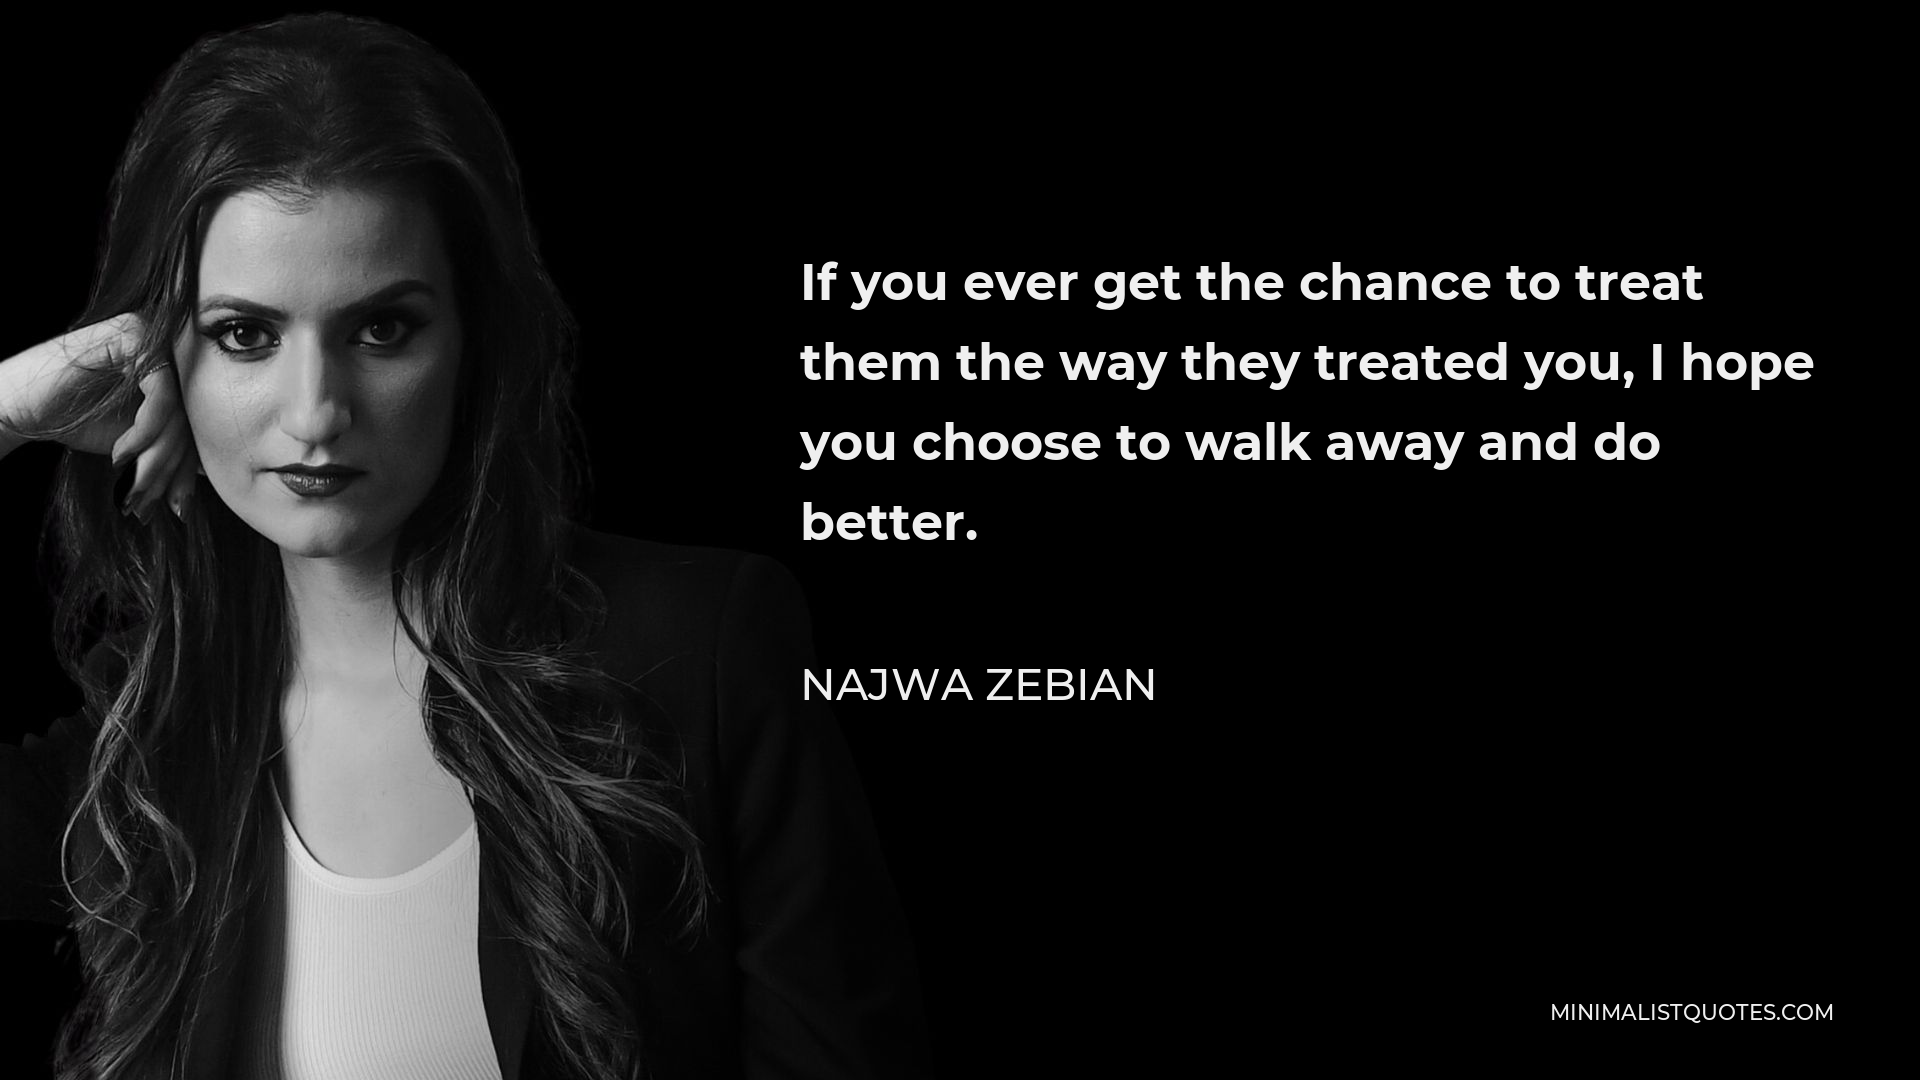 Najwa Zebian Quote - If you ever get the chance to treat them the way they treated you, I hope you choose to walk away and do better.